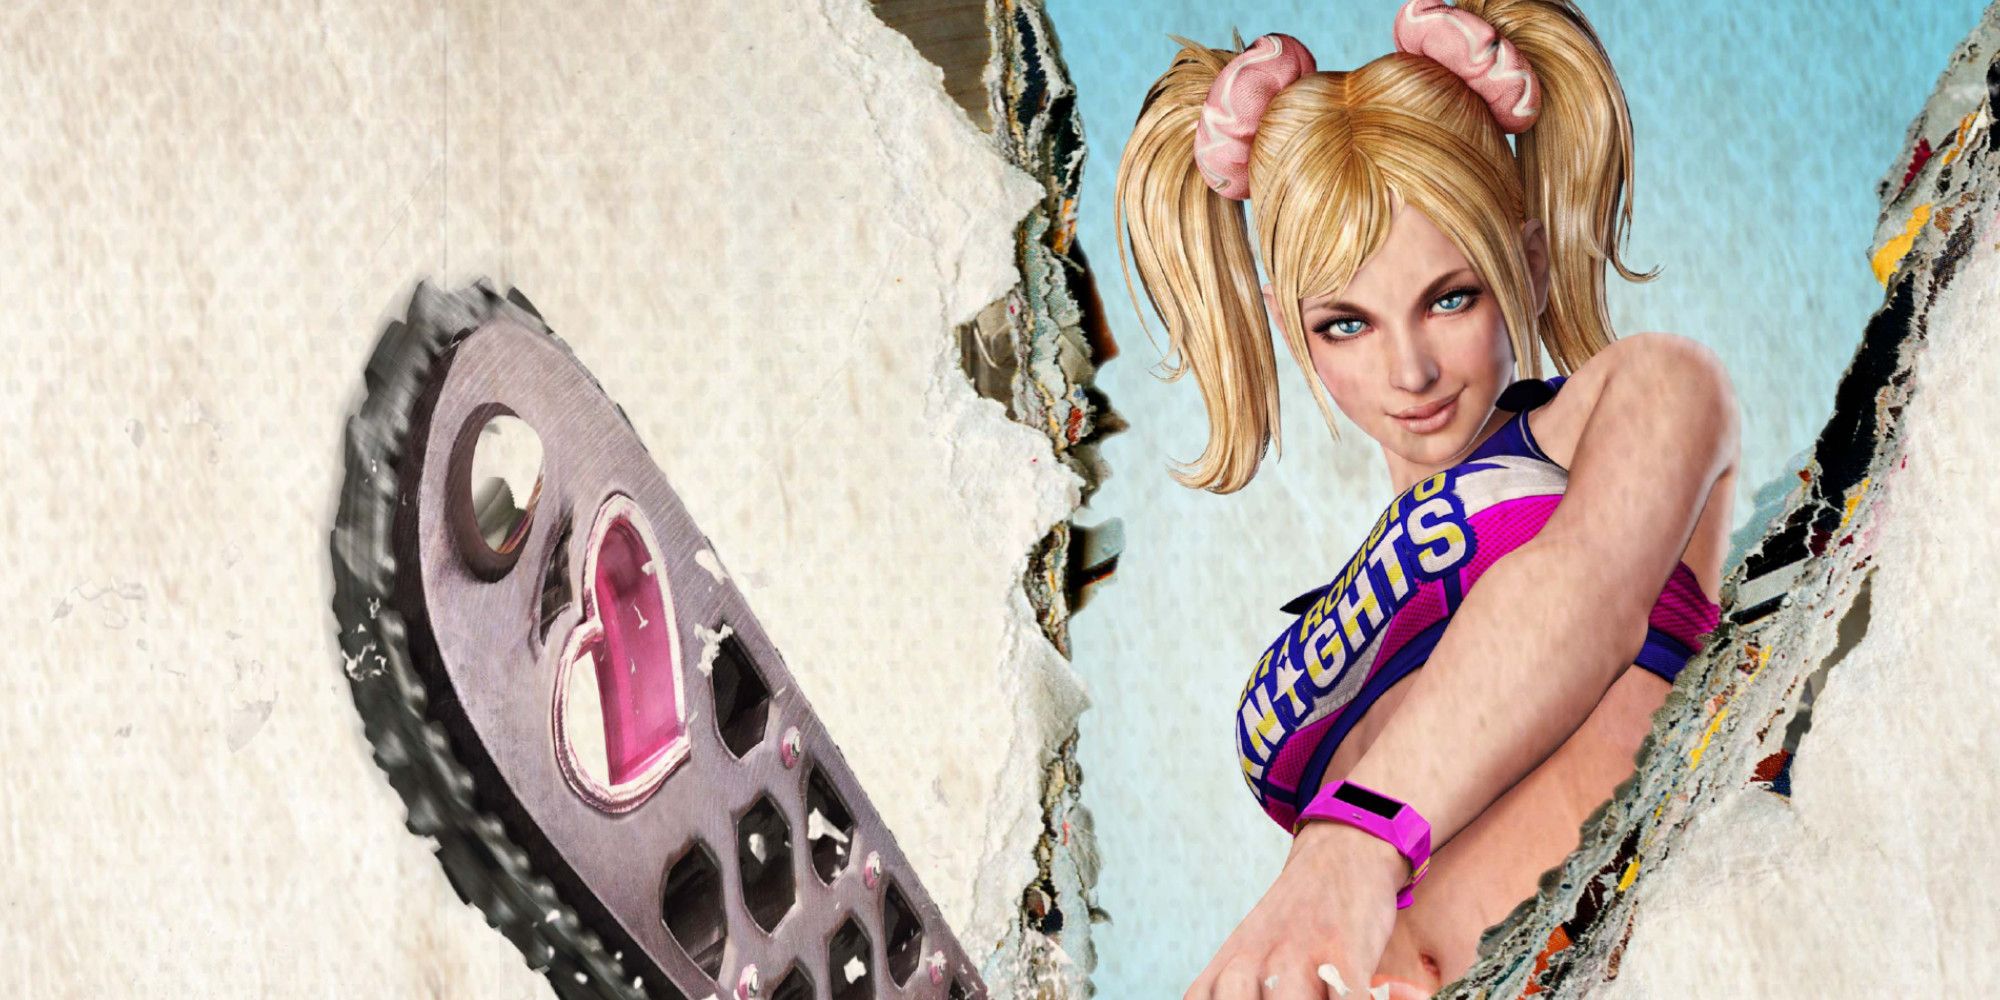 lollipop chainsaw juliet holding a chainsaw suggestively